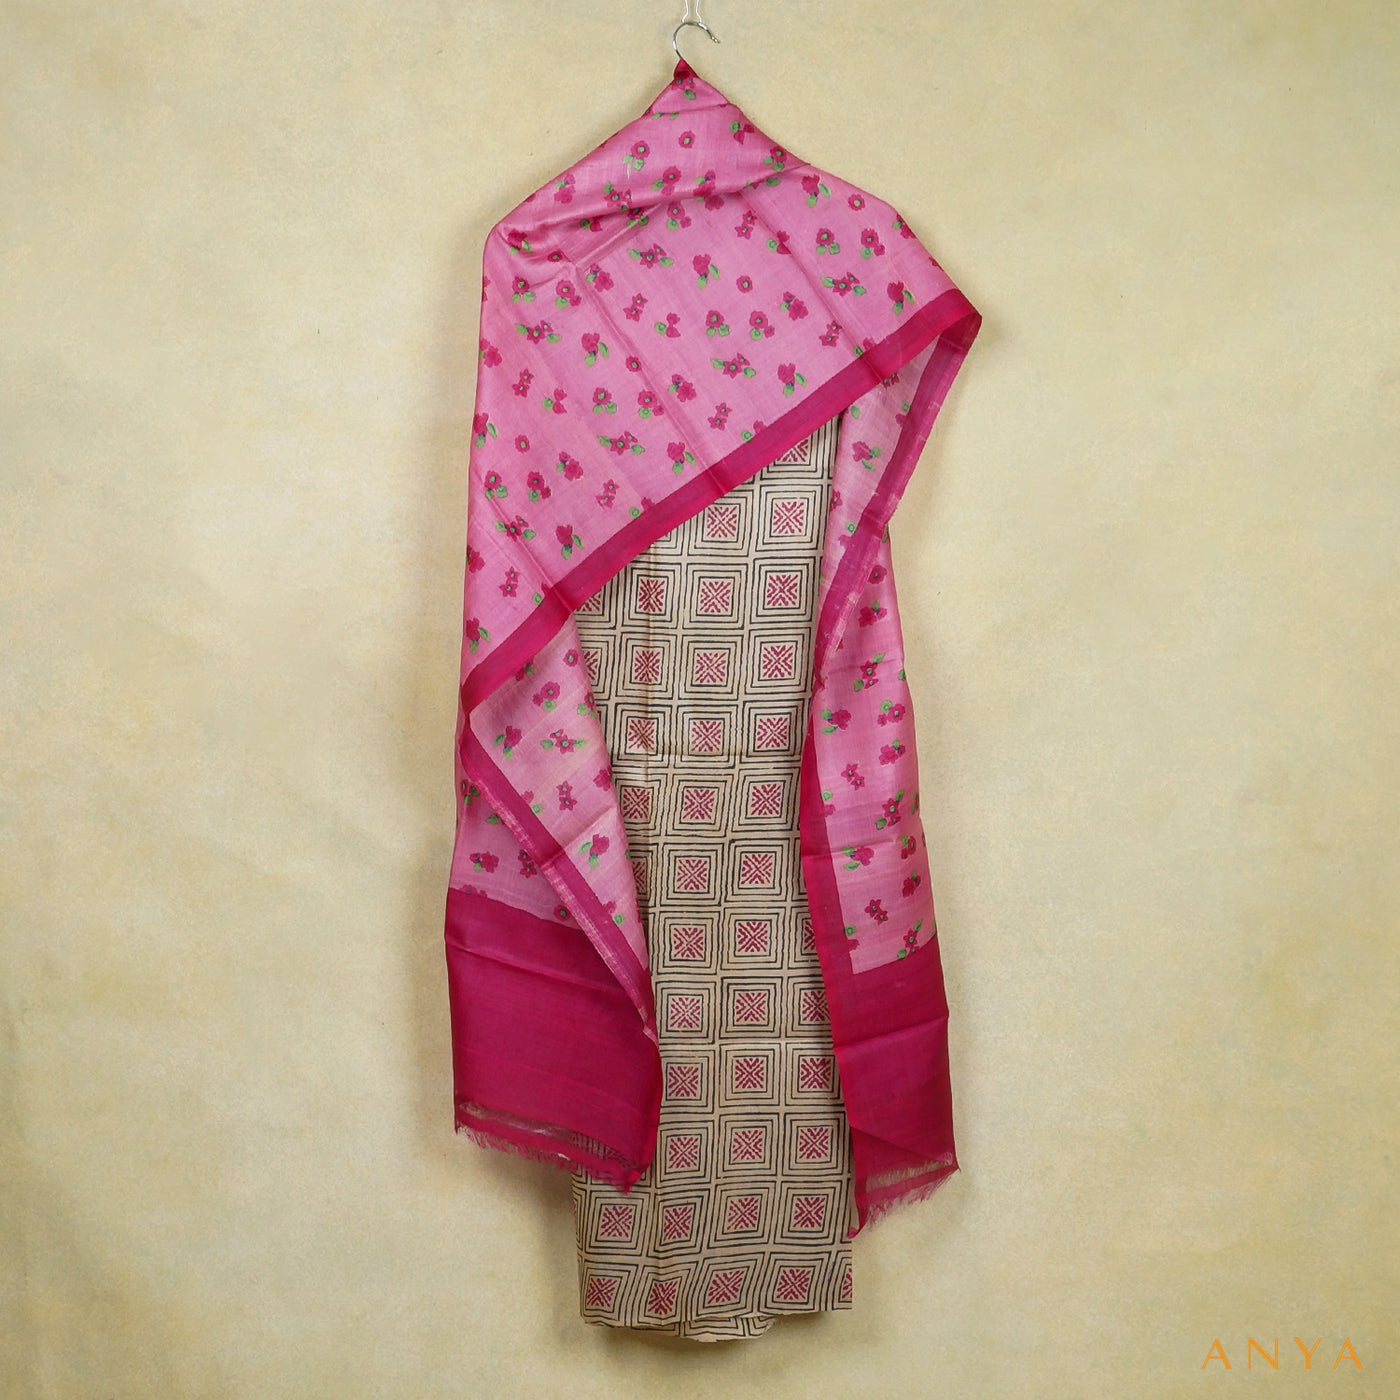 Off White Tussar Silk Salwar with Onion Pink Floral Printed Dupatta